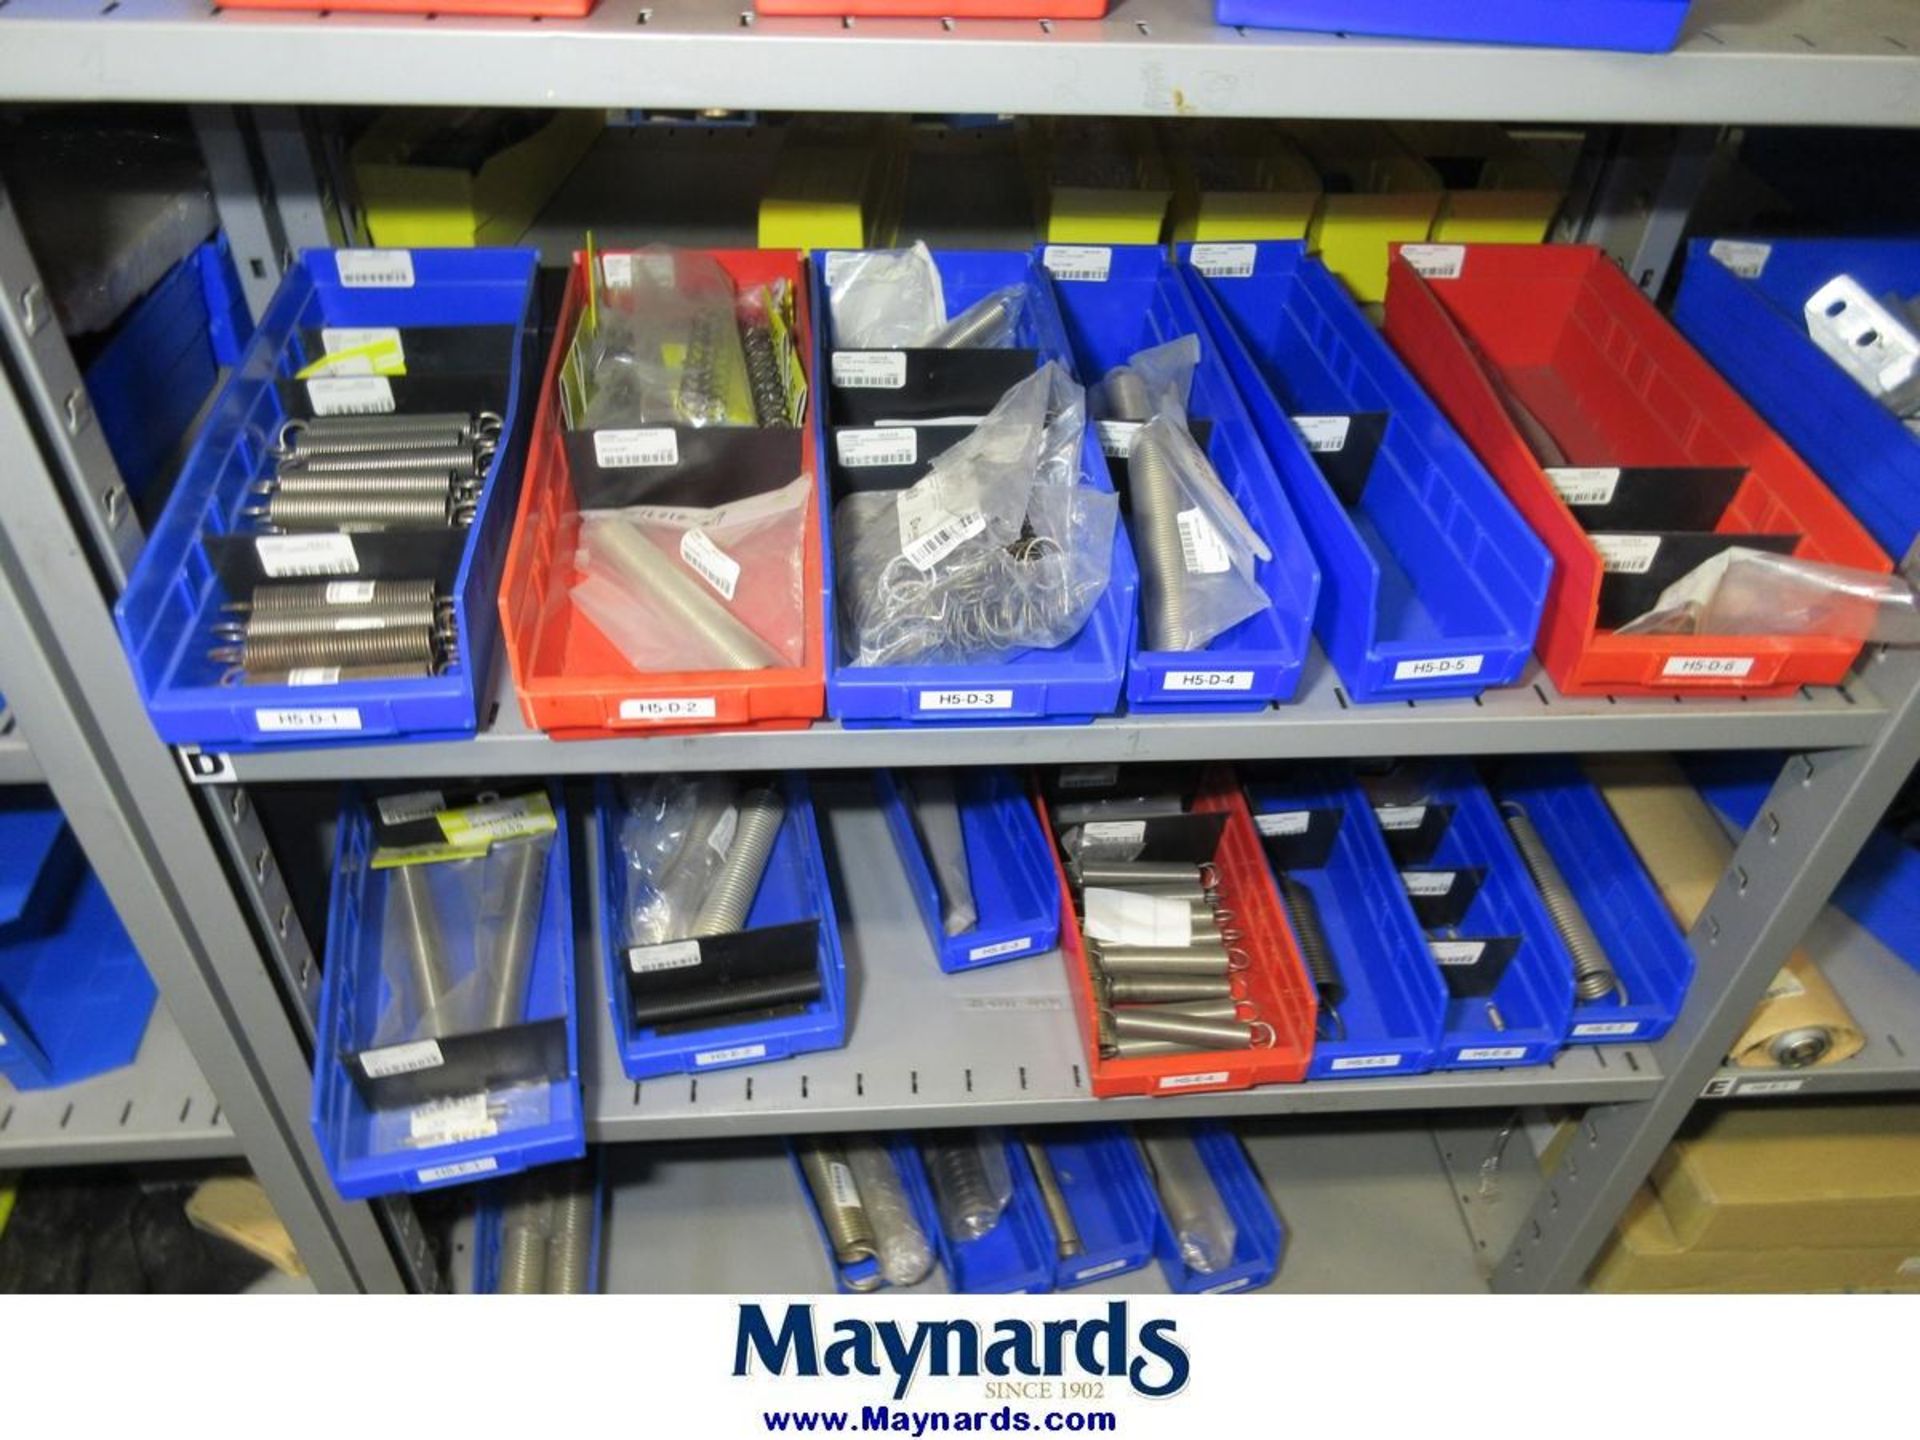 Large Lot of Electrical Controls, PLC's, Drives & Remaining Contents of Maint. Parts Crib - Image 55 of 107